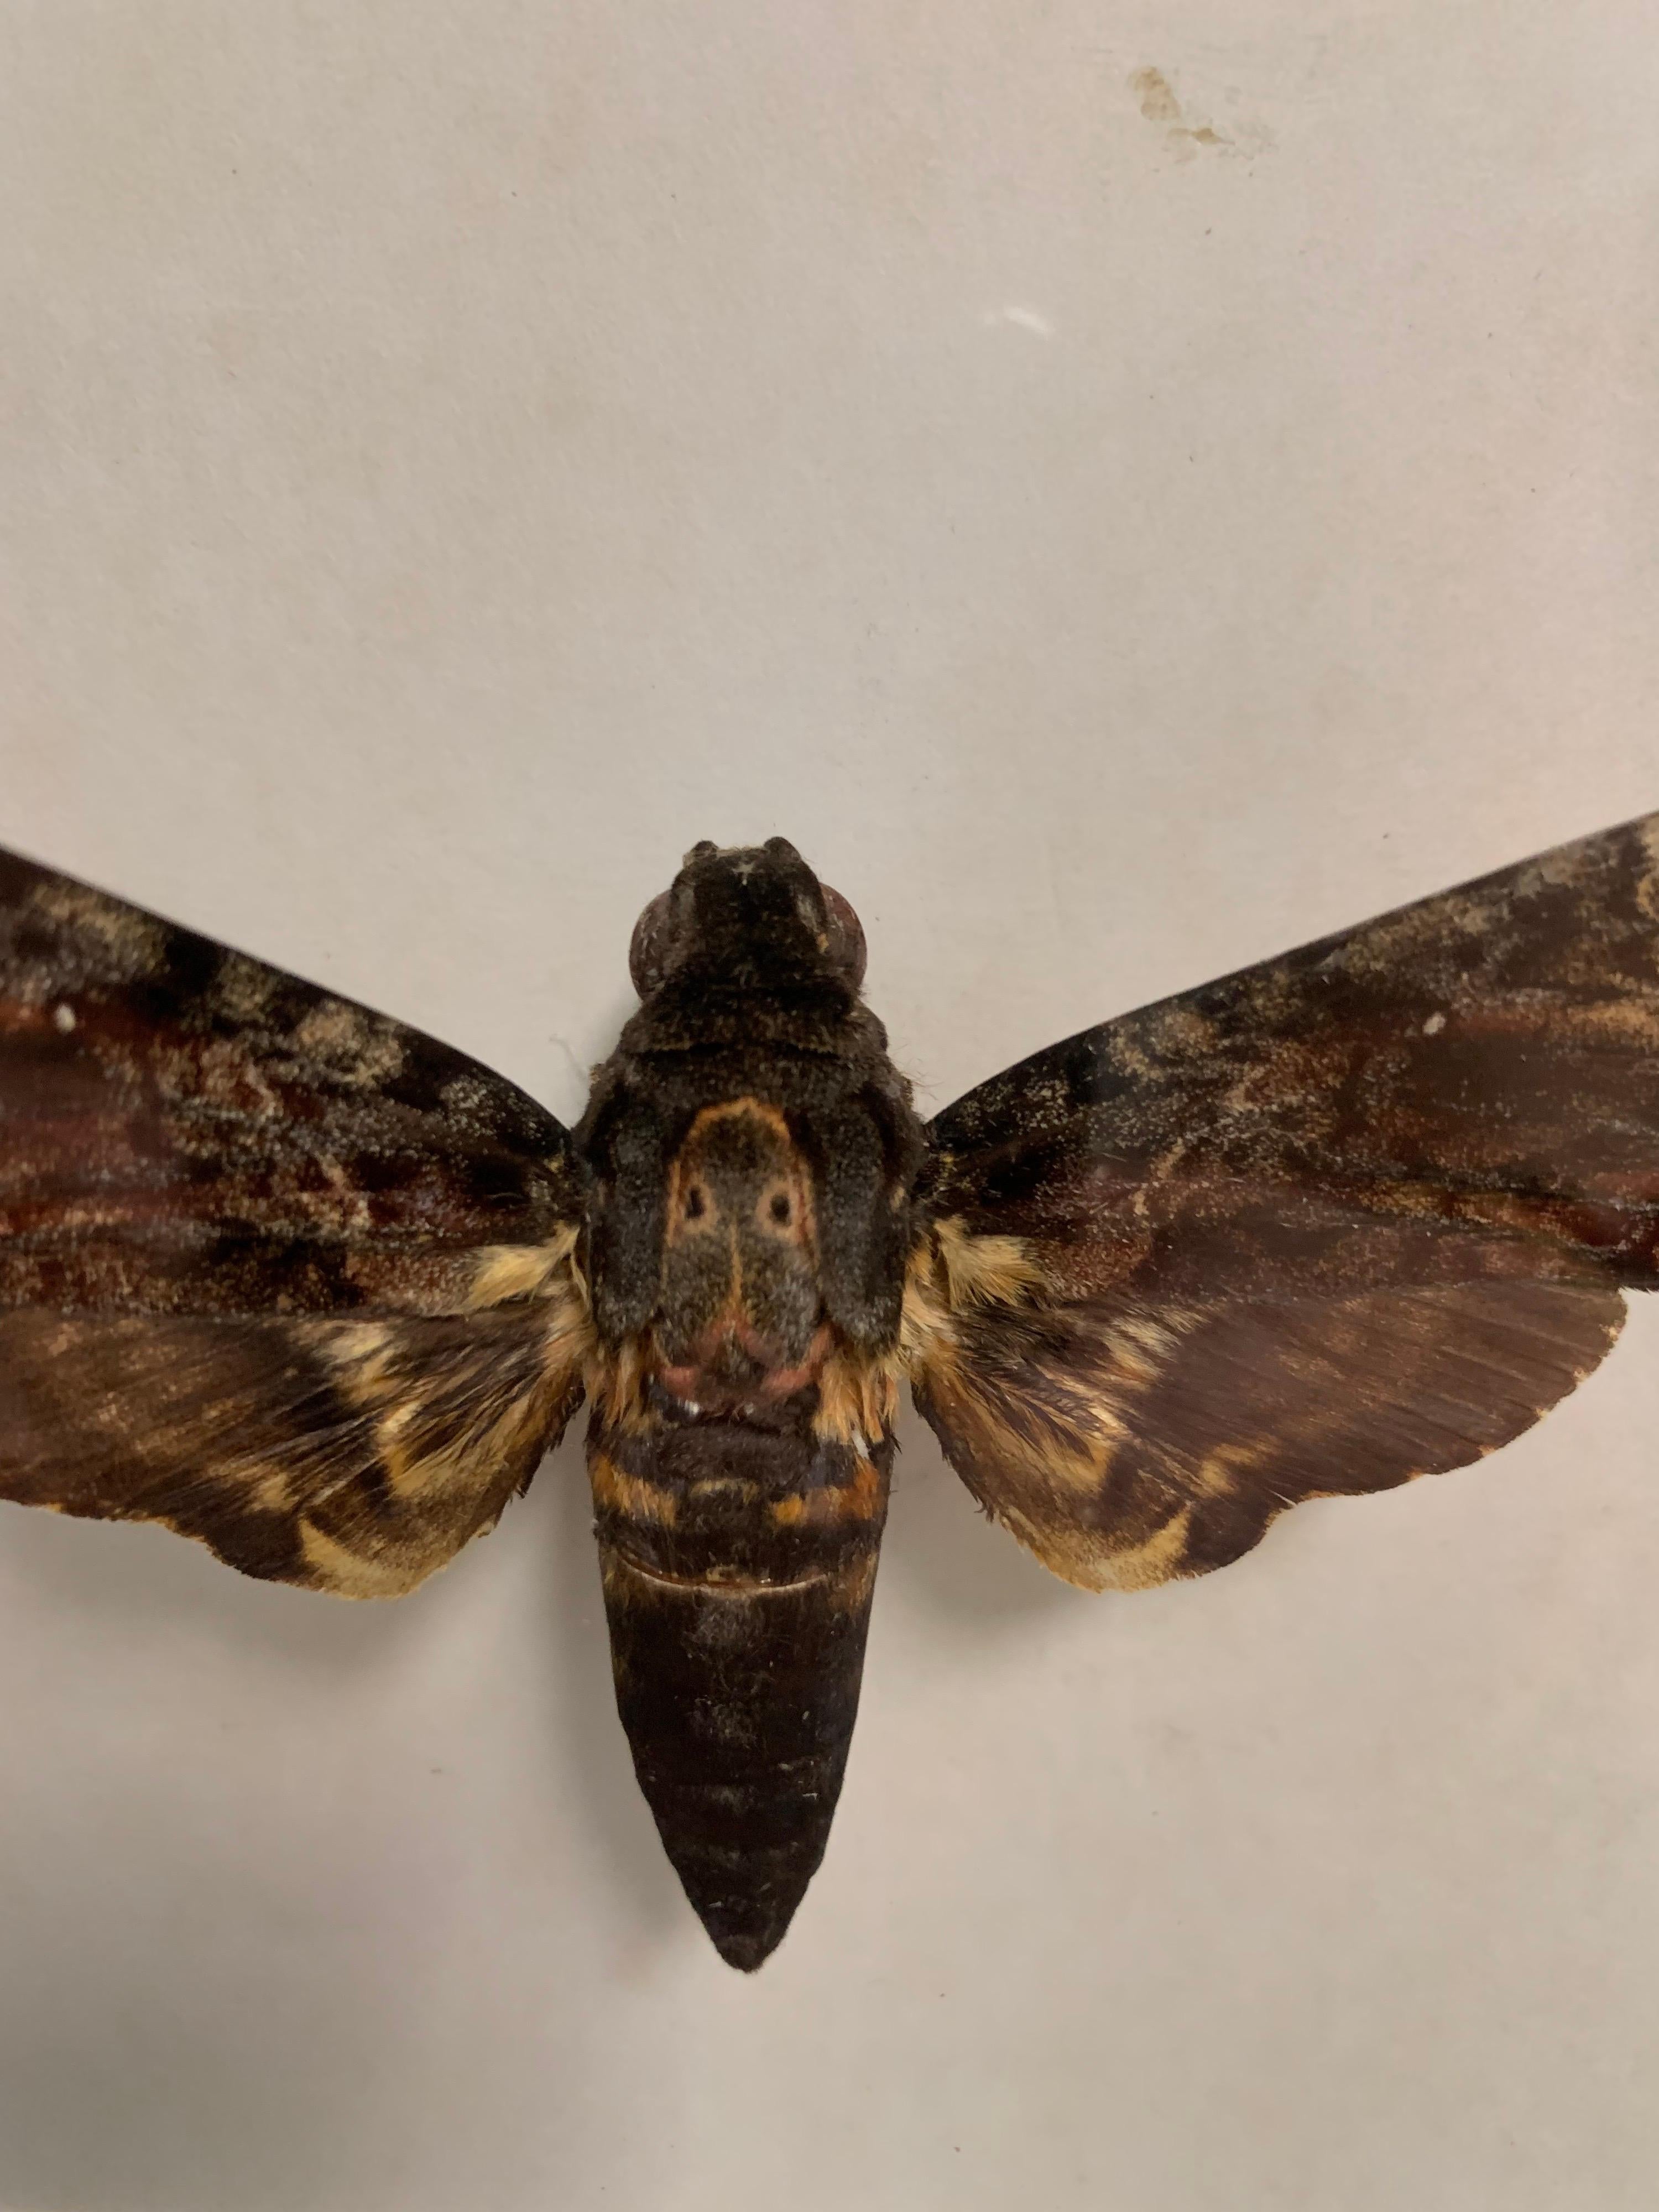 Ever seen Silence of the lambs? This is a skillfully prepared Death's Head Moth, Latin (Acherontia Lachesis). The details are absolutely stunning and has a beautifull skull on his back. Great for decoration or to study. Non-Cites species.

The